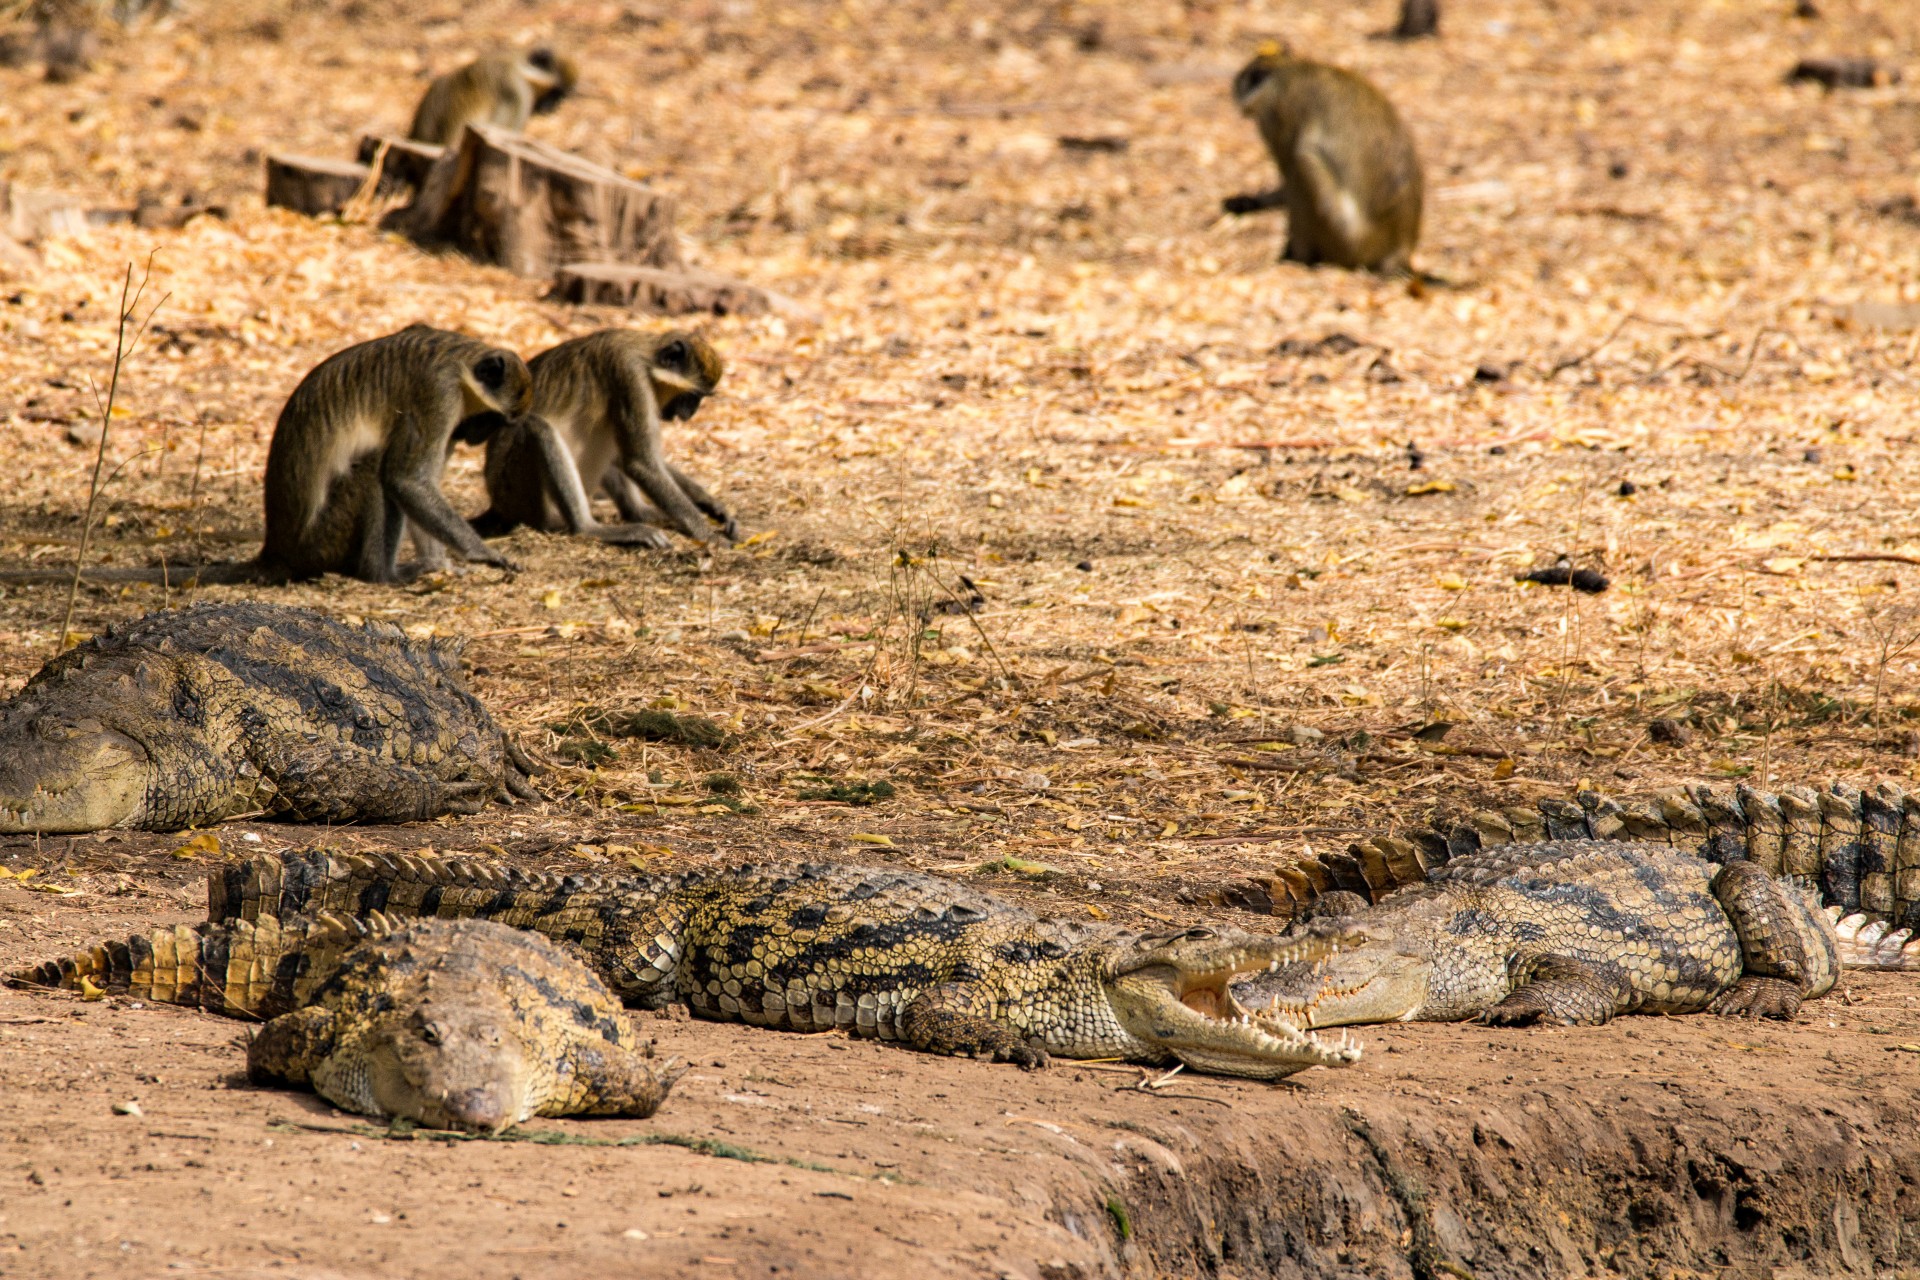 Nile crocodile and monkeys in the Bandia Reserve in Senegal, West Africa